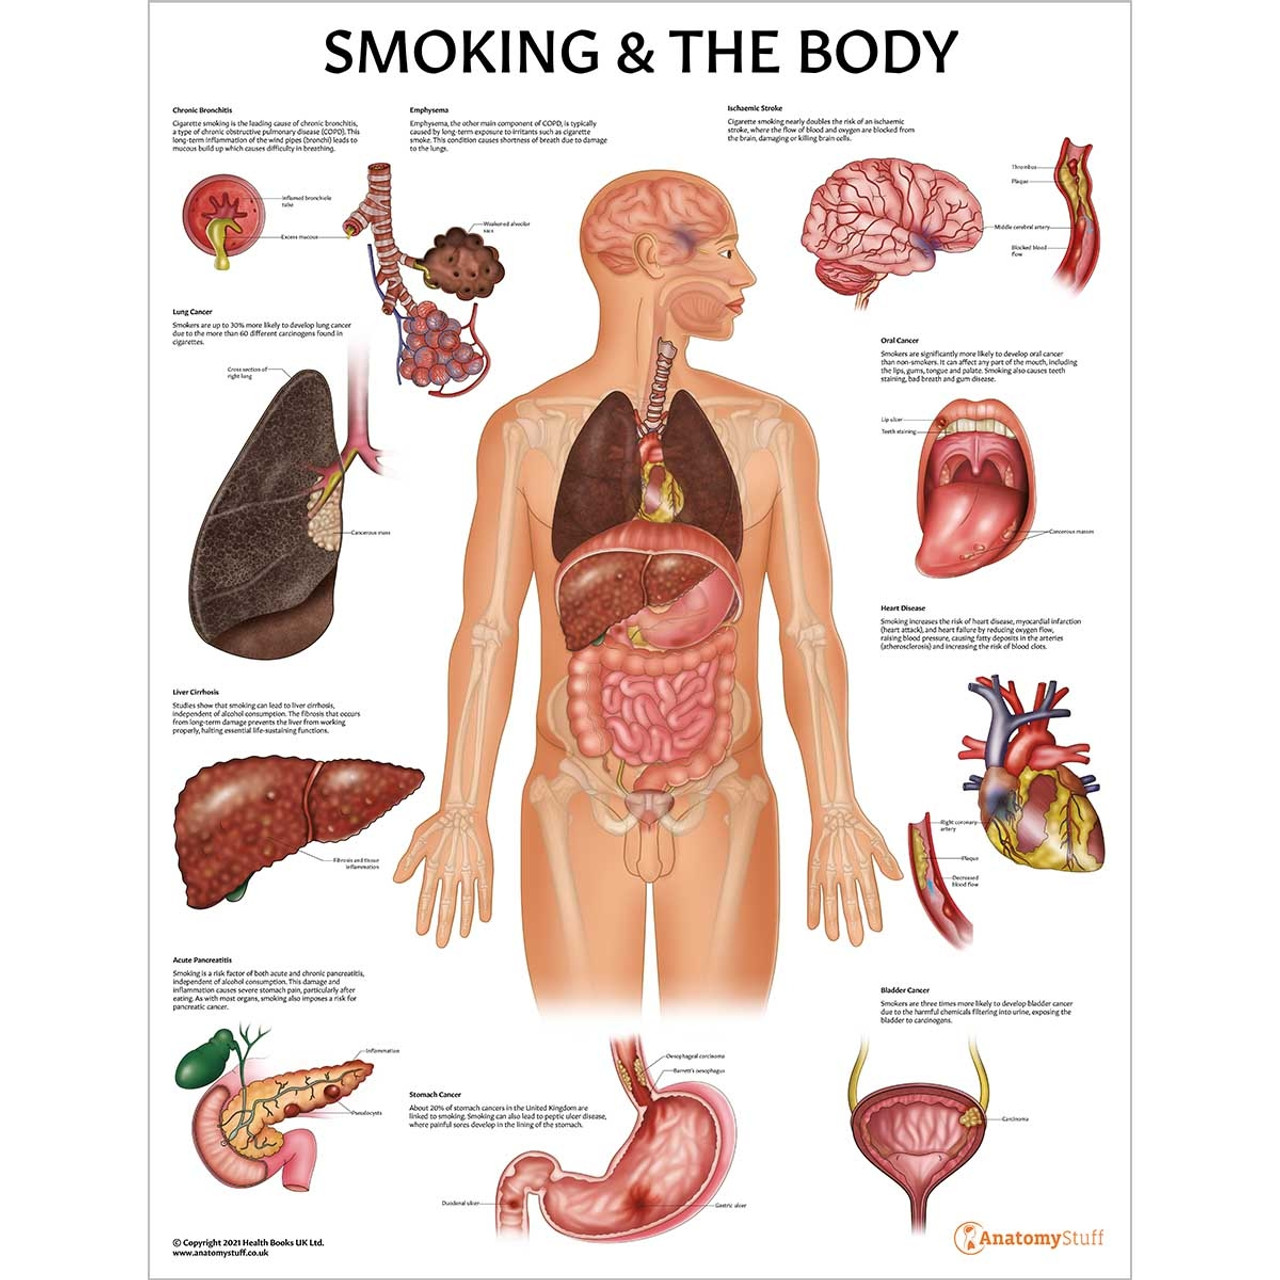 cigarette smoking effects on the body